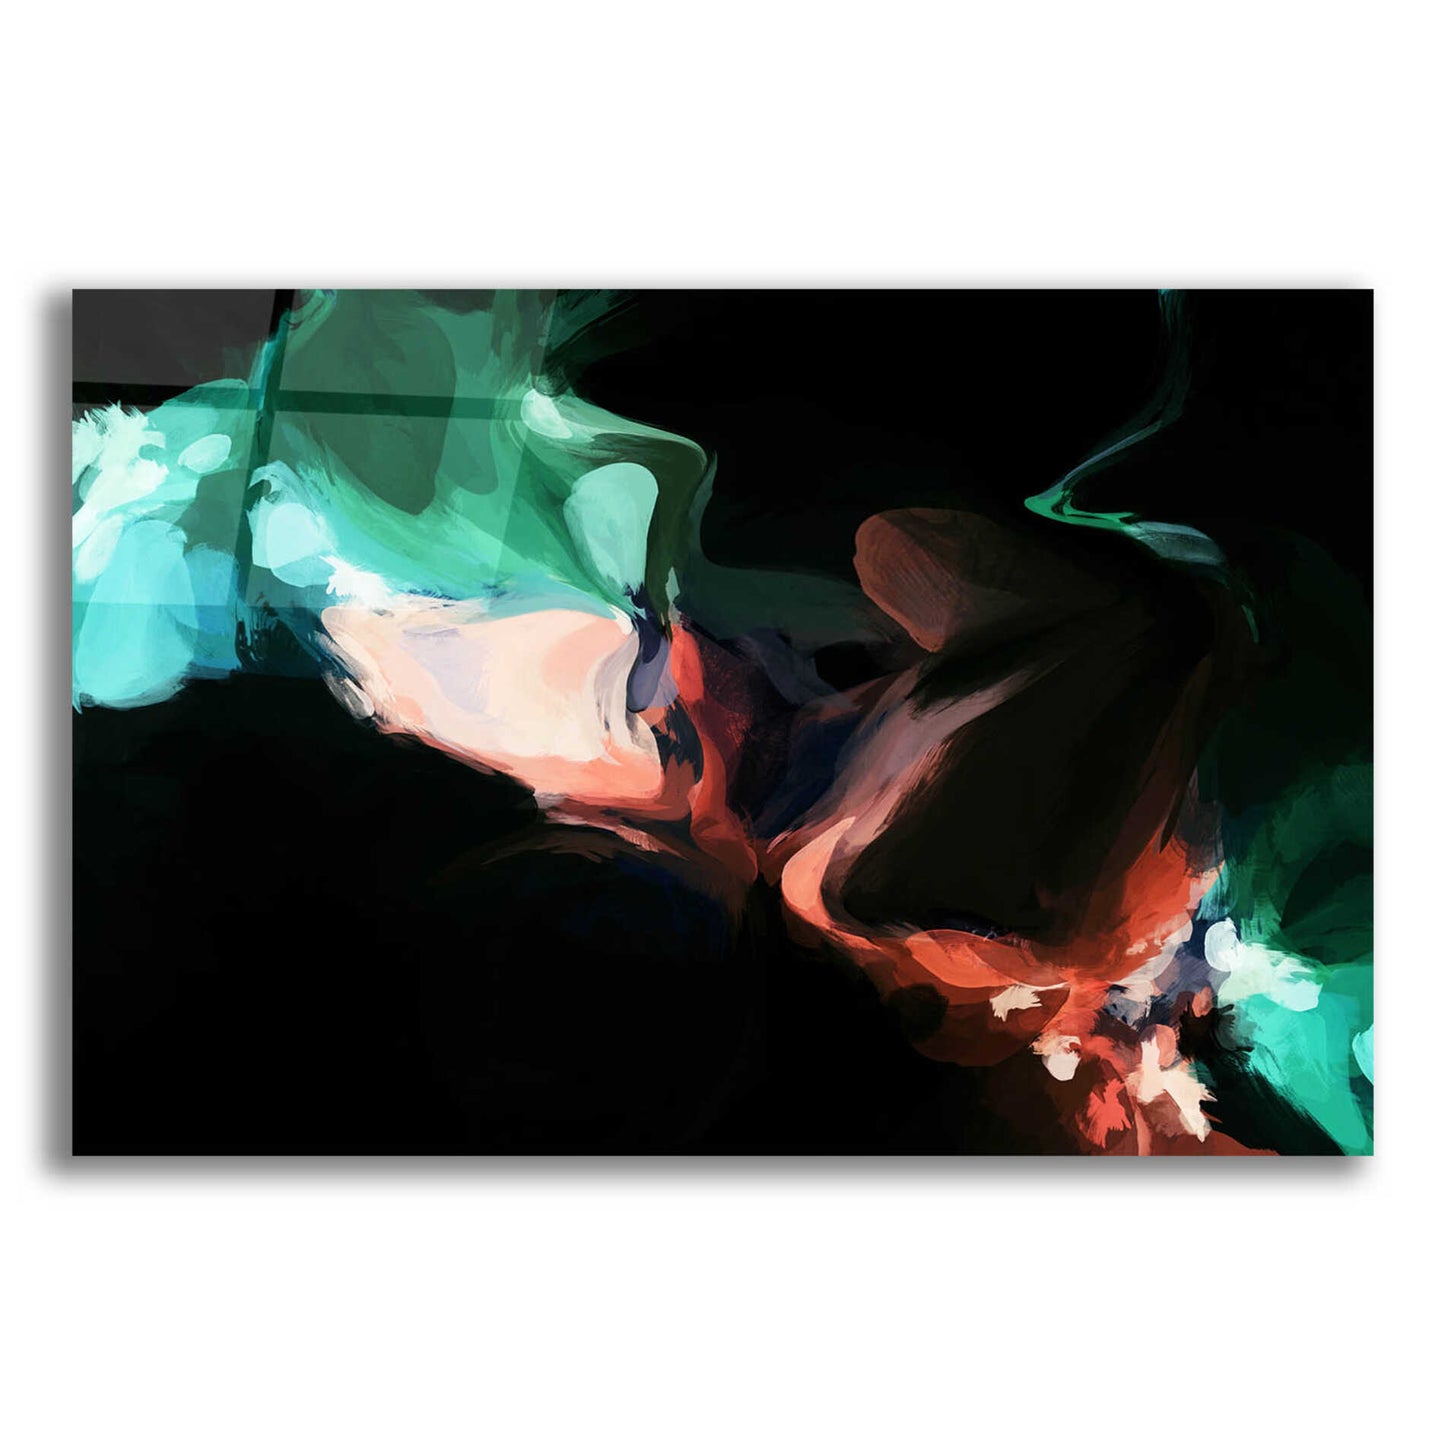 Epic Art 'Inverted Abstract Colorful Flows 18' by Irena Orlov Acrylic Glass Wall Art,24x16